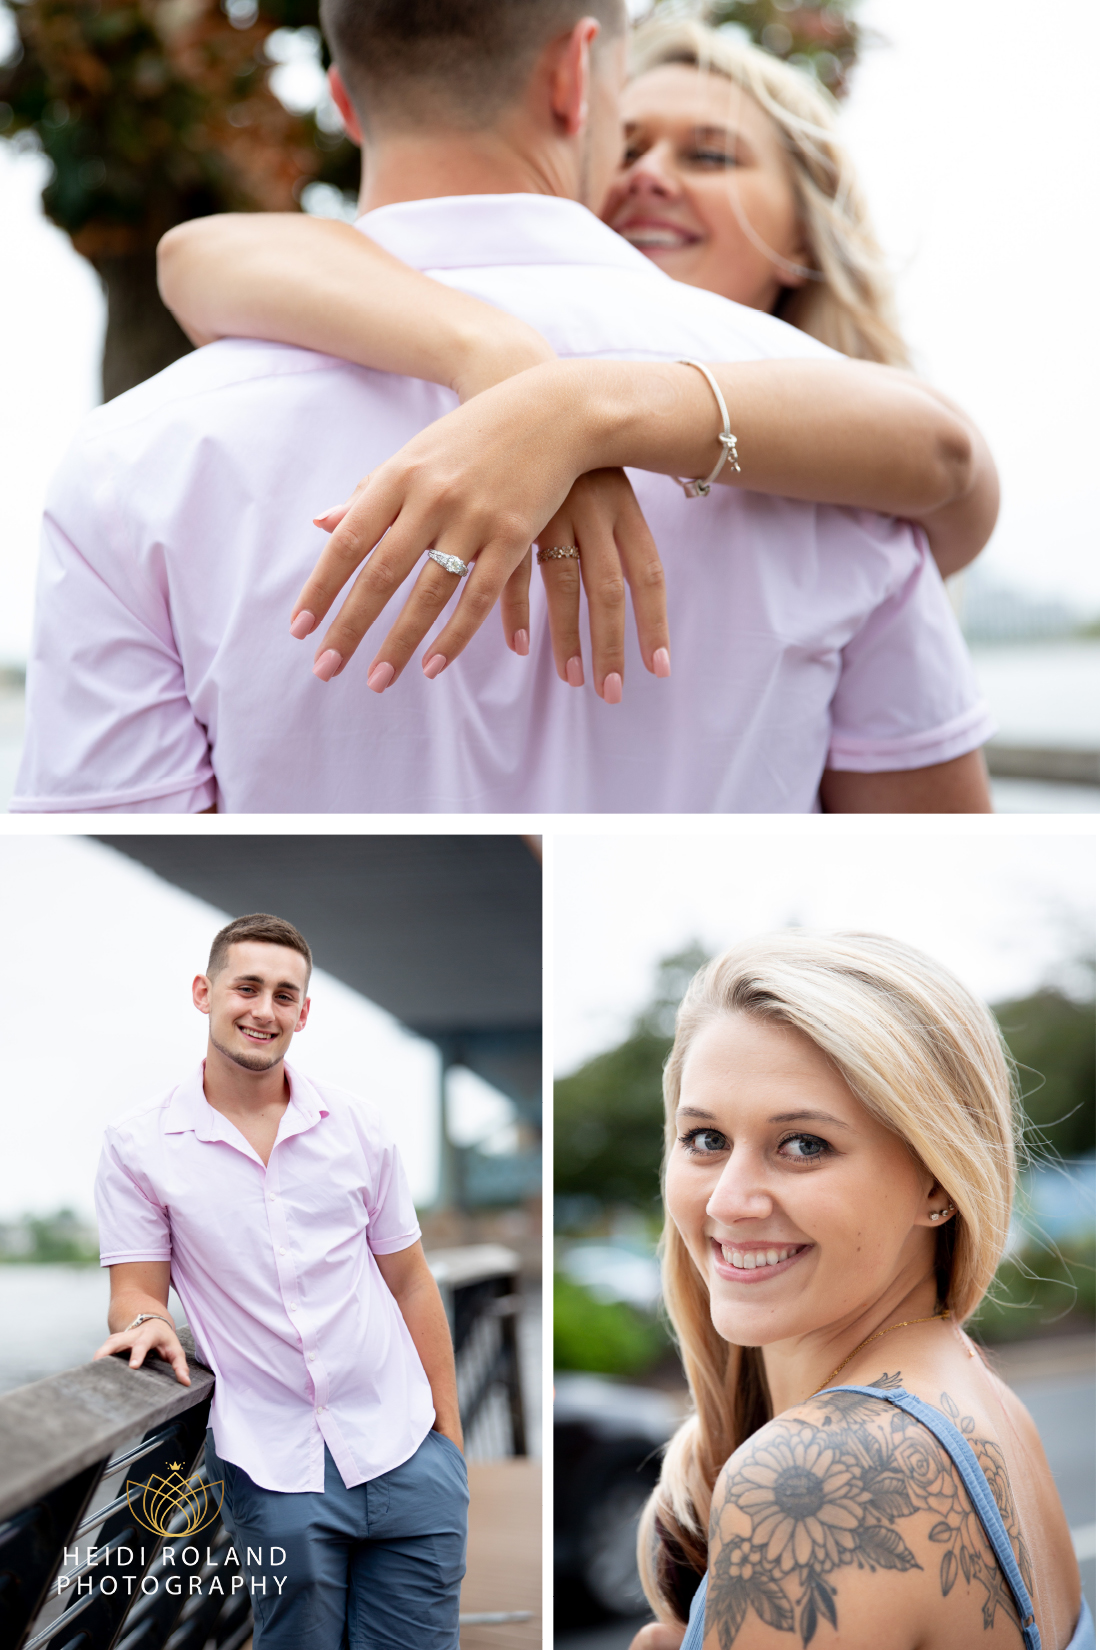 Engaged woman showing off new engagement ring after Philadelphia Proposal by Heidi Roland photography